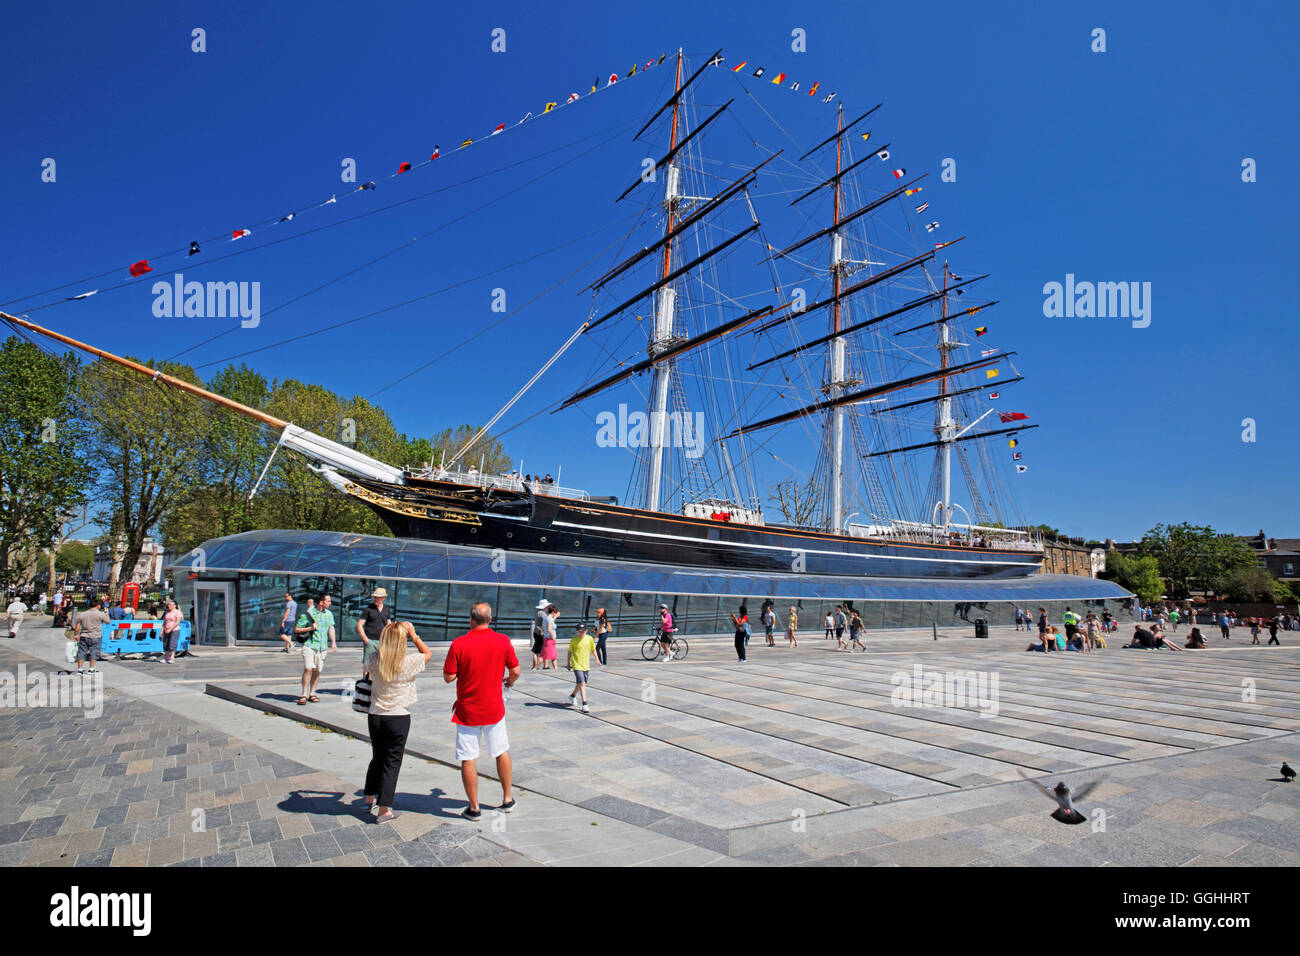 Cutty Sark Museum, Greenwich, London, England, United Kingdom Banque D'Images